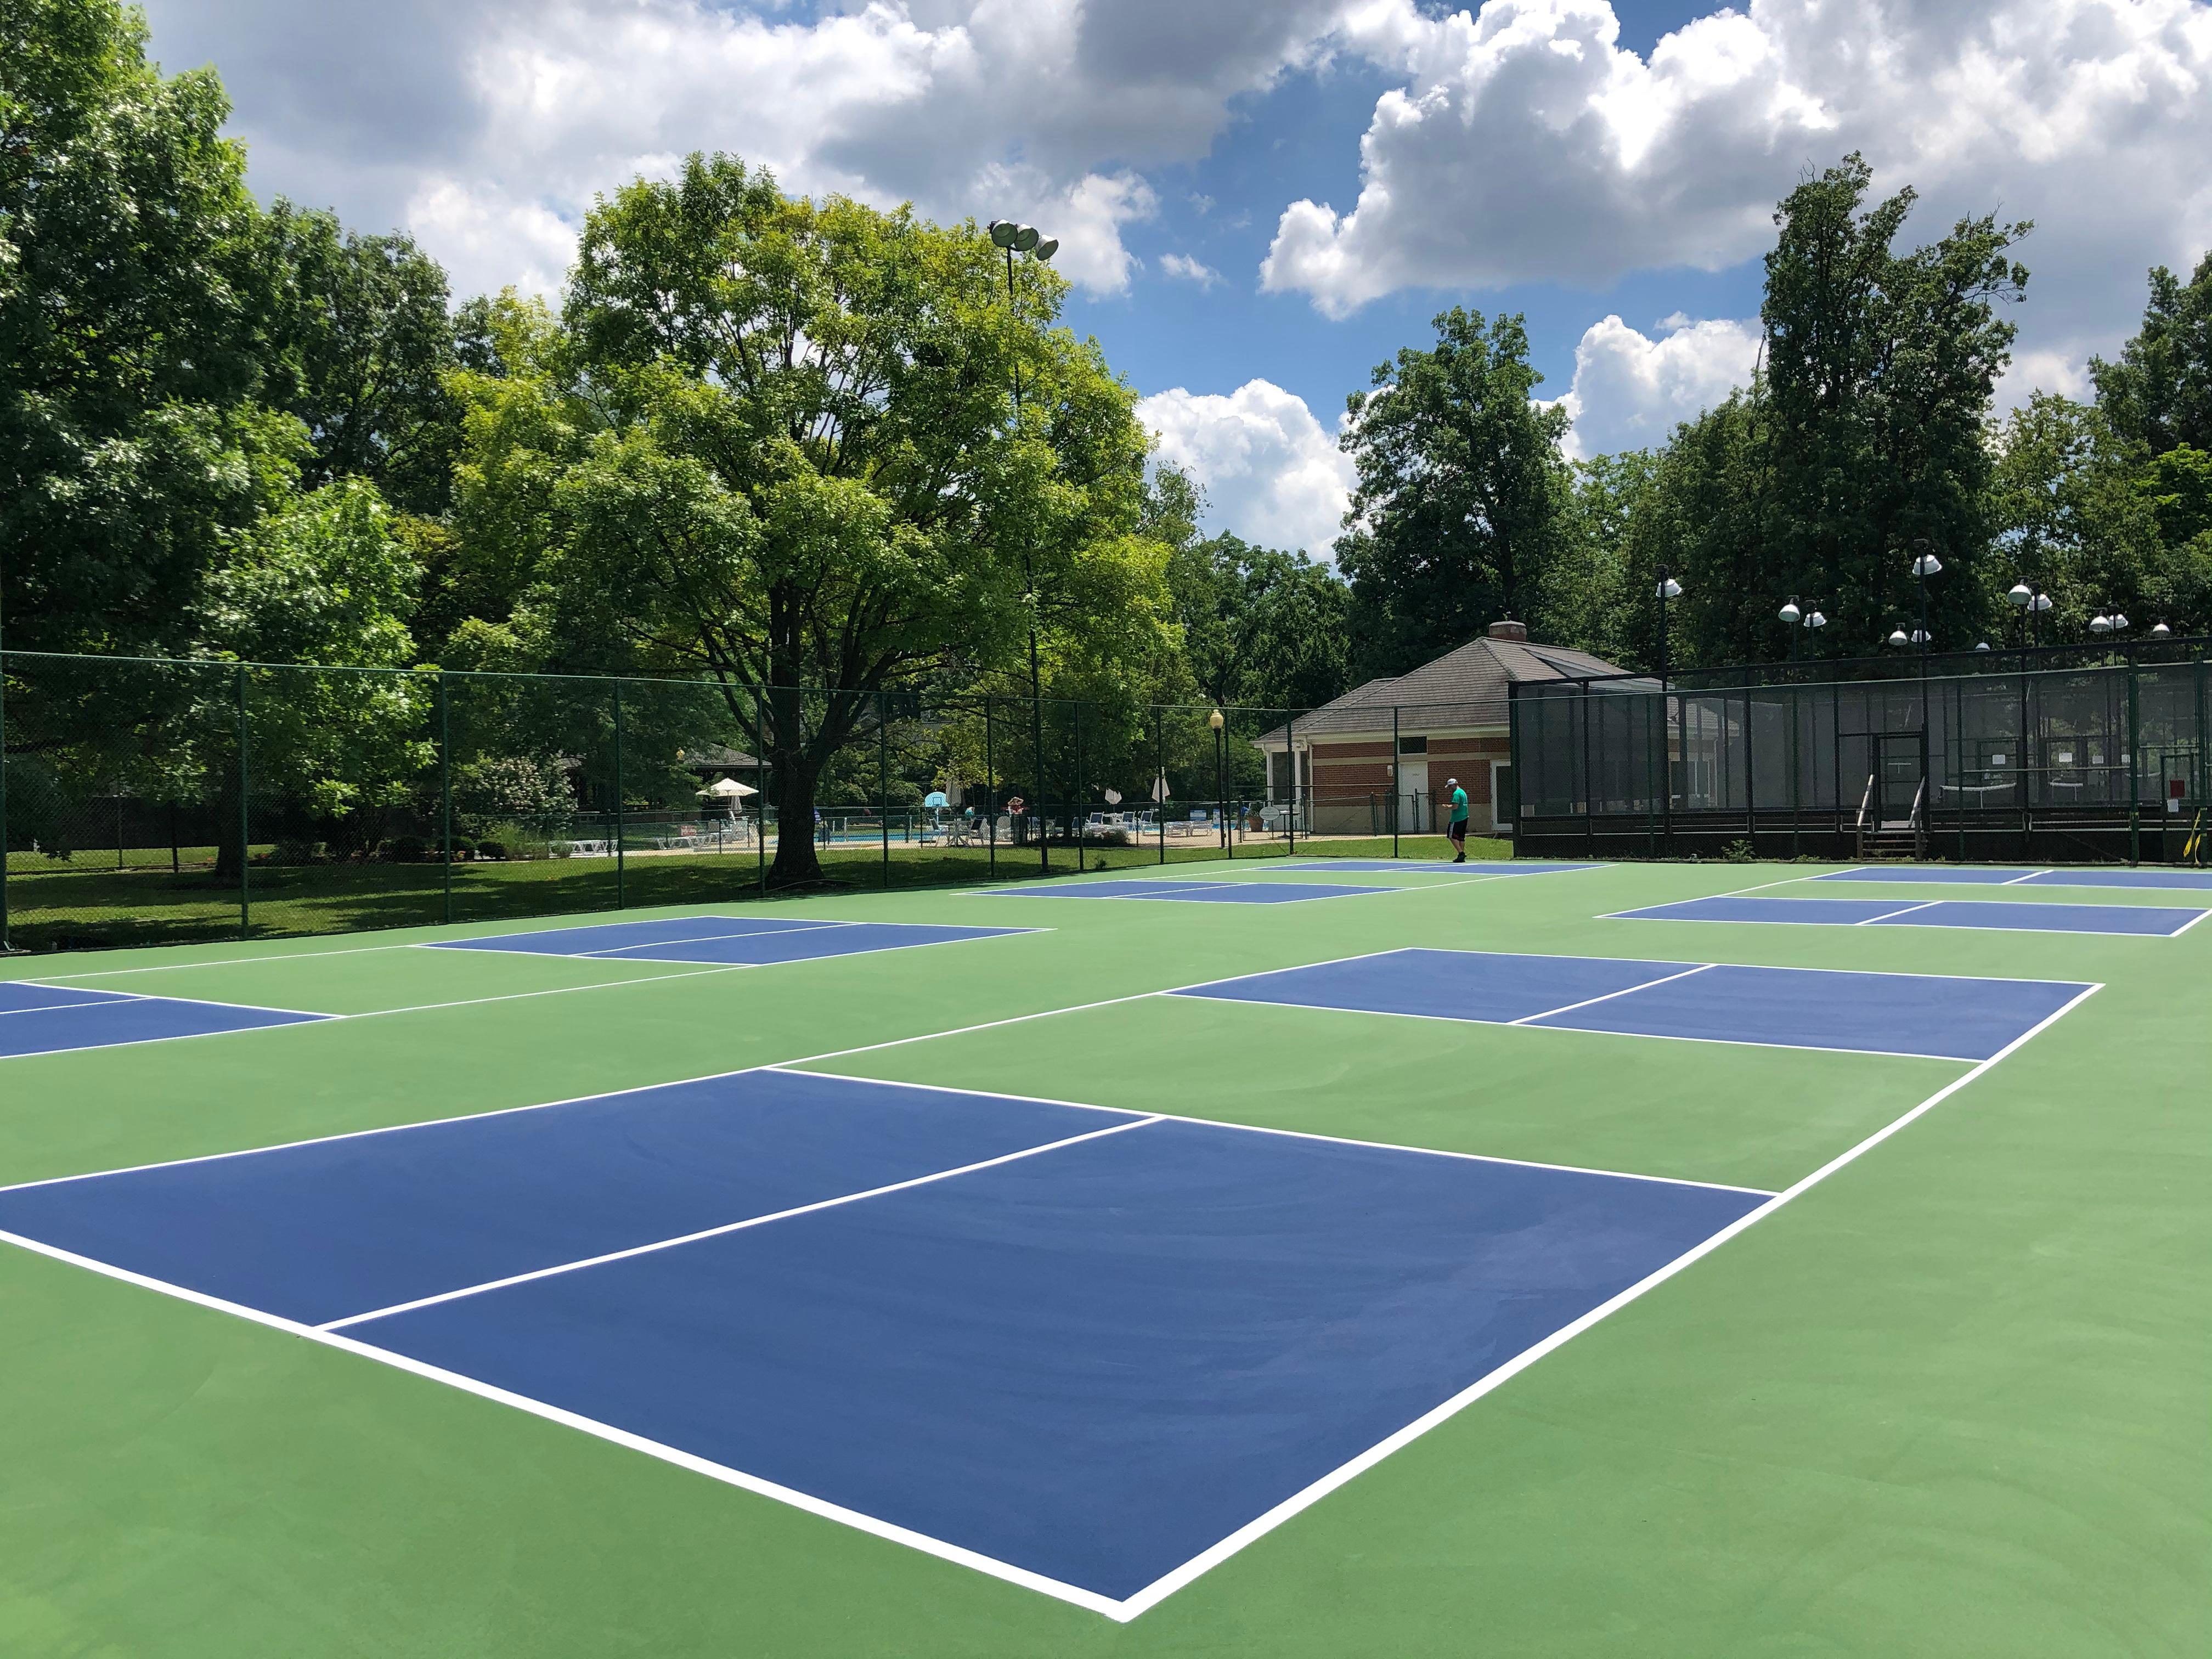 We still have time to get your new court in, remodel your court or just re-stripe your current court Schubert Tennis LLC Cincinnati (513)310-5890